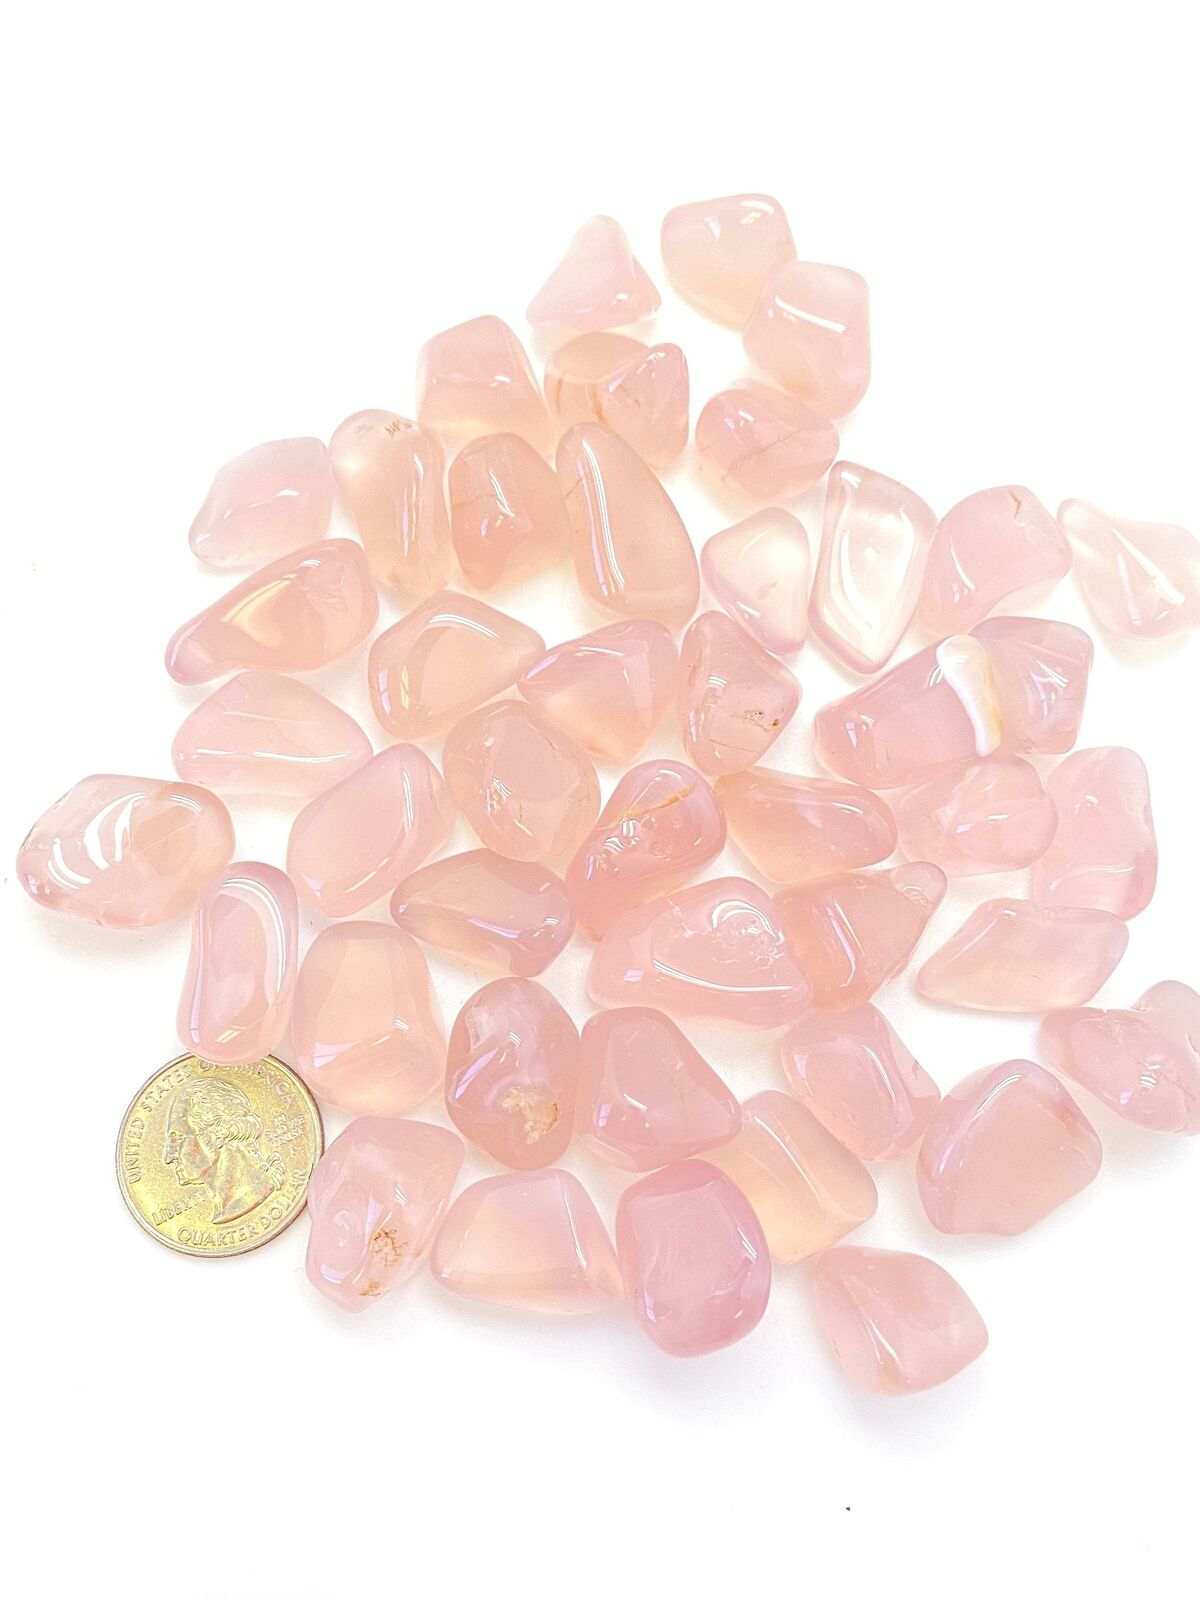 Pink Chalcedony Tumbled Stone - Polished Pink Chalcedony Crystal